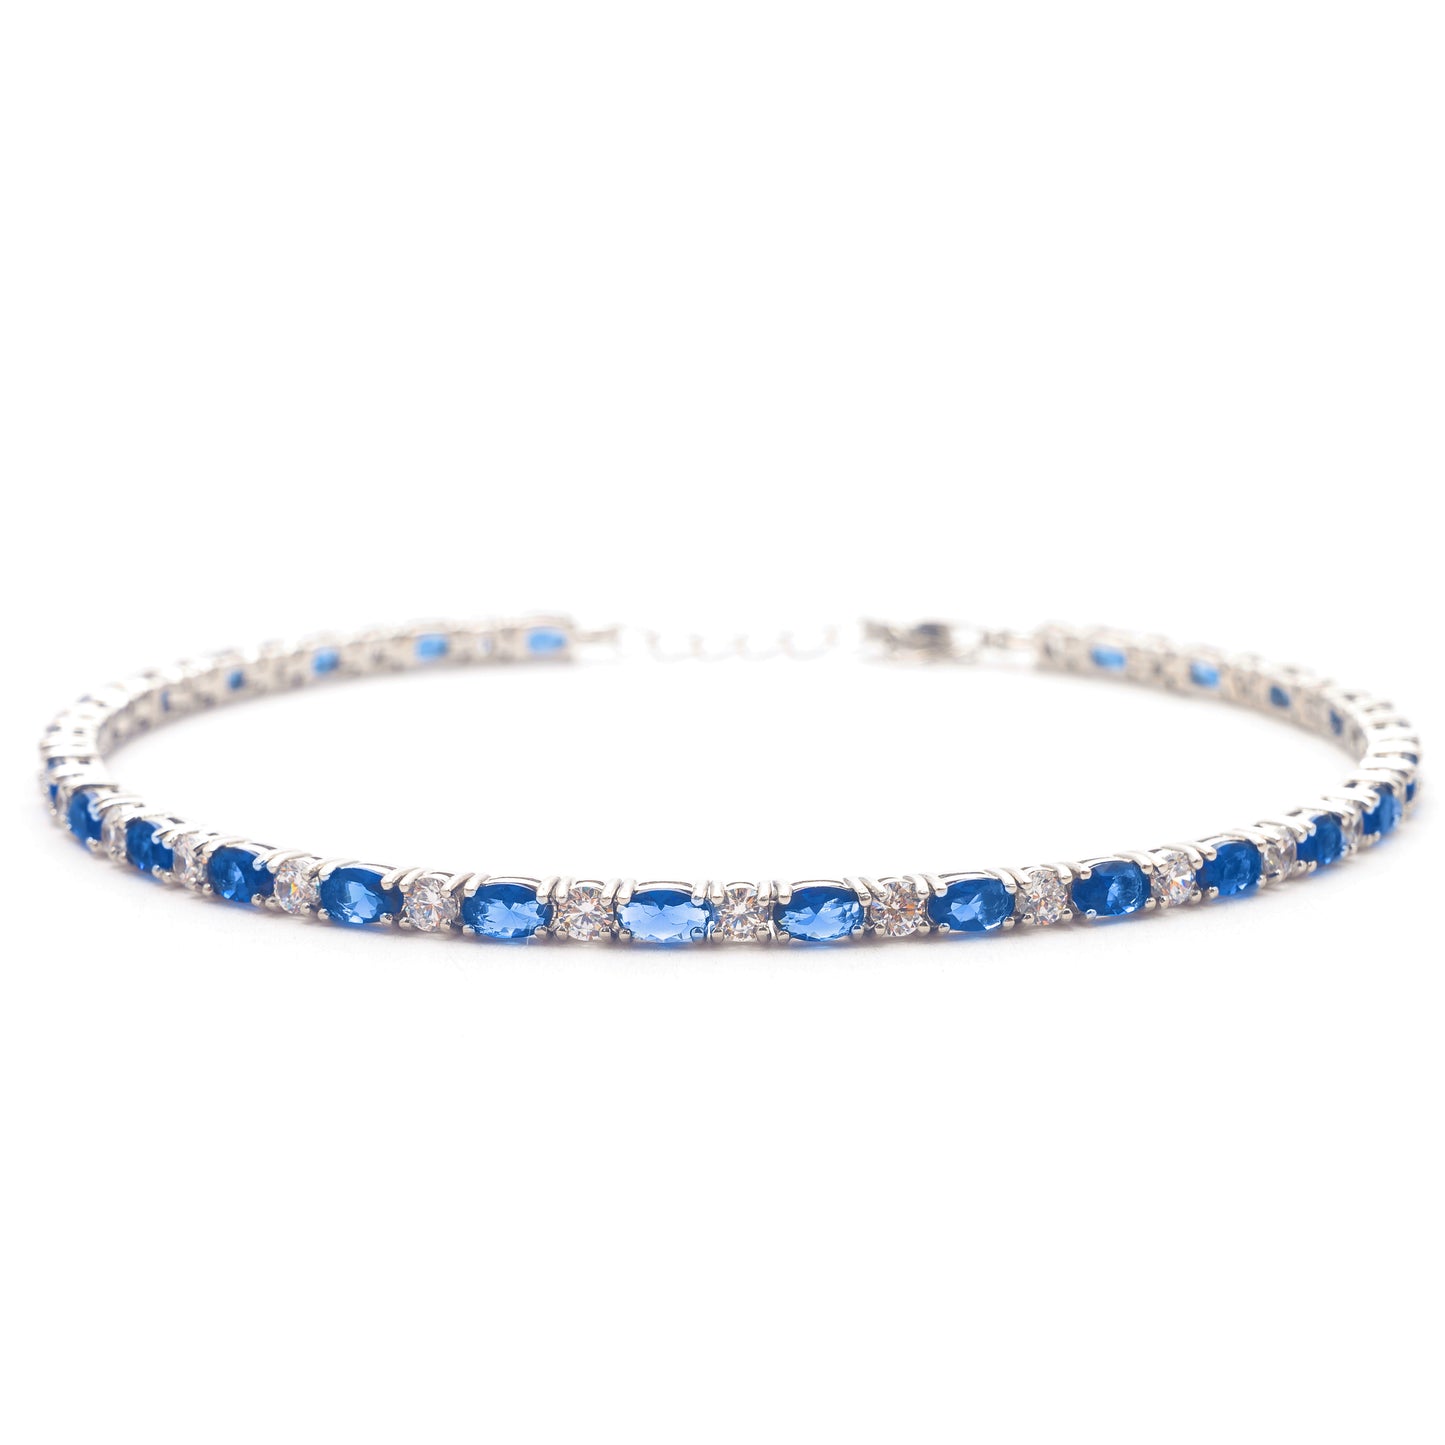 ICY SAPPHIRE ANKLET